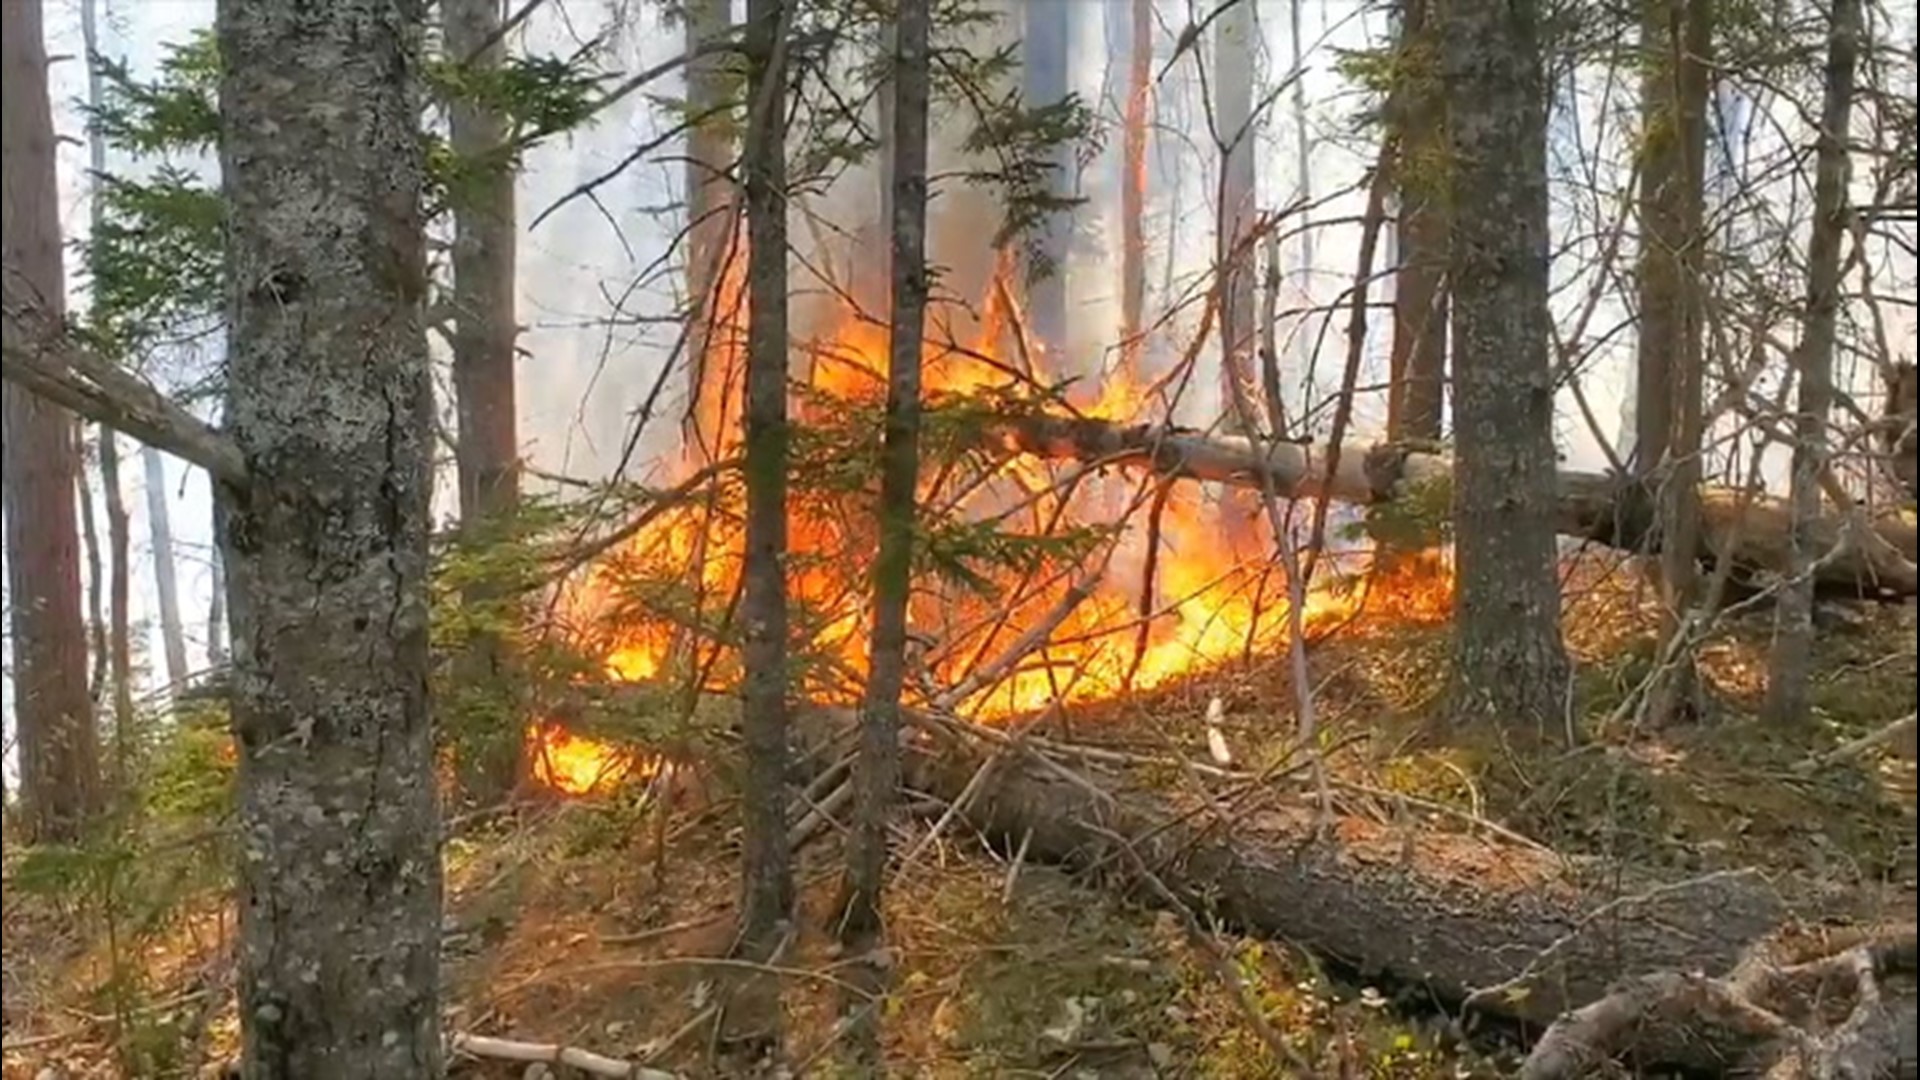 Multiple wildfires burning in Maine, including this fire in Baxter State Park, triggered a red flag warning on May 21.